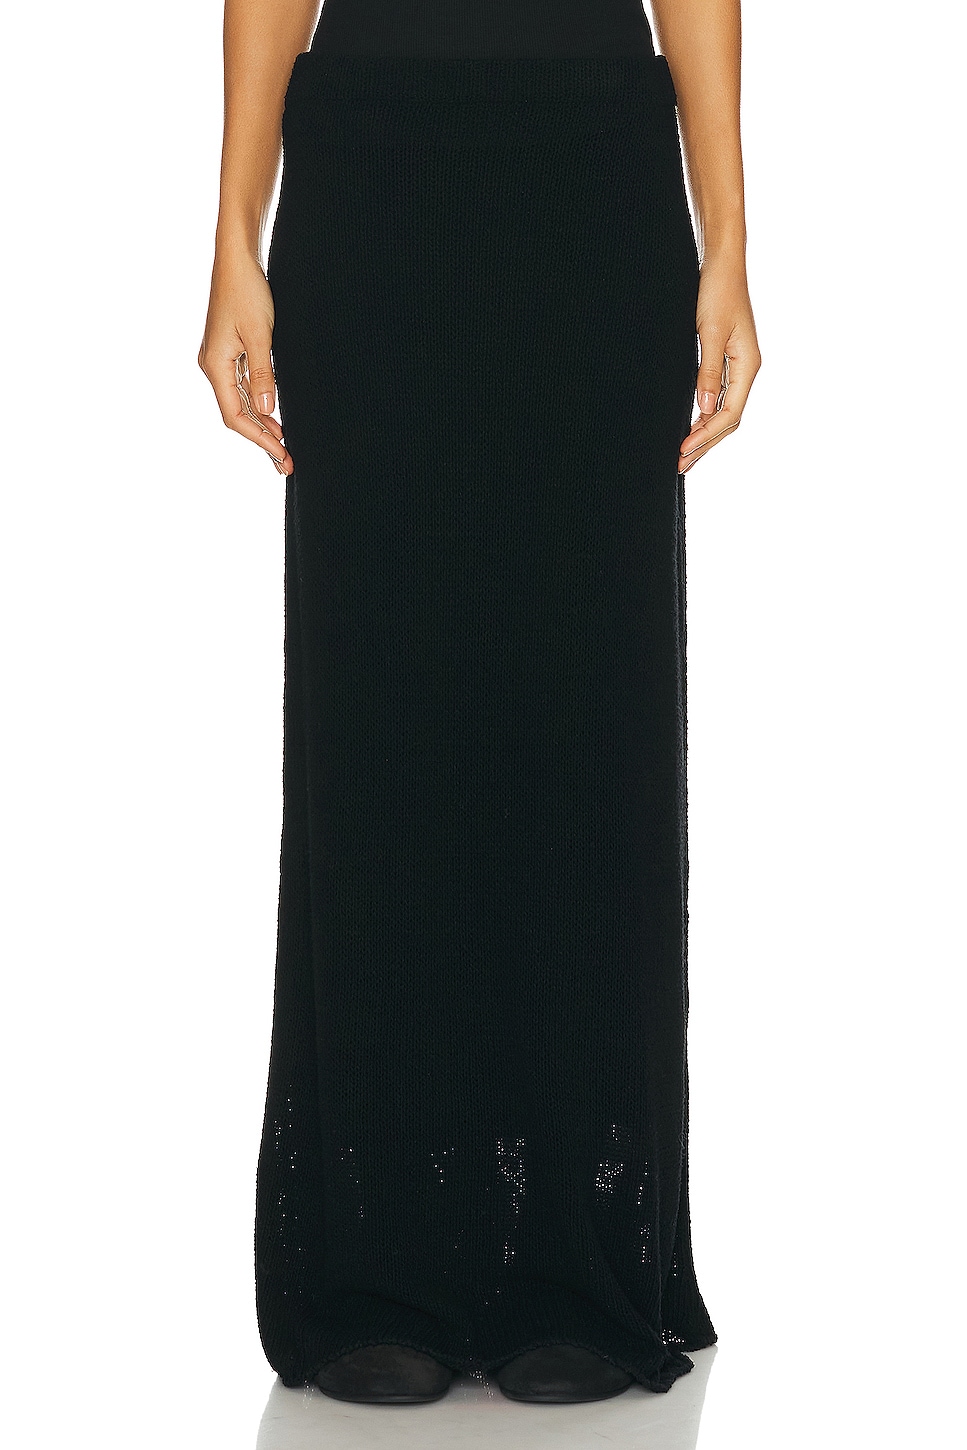 Image 1 of The Row Fumaia Skirt in Black